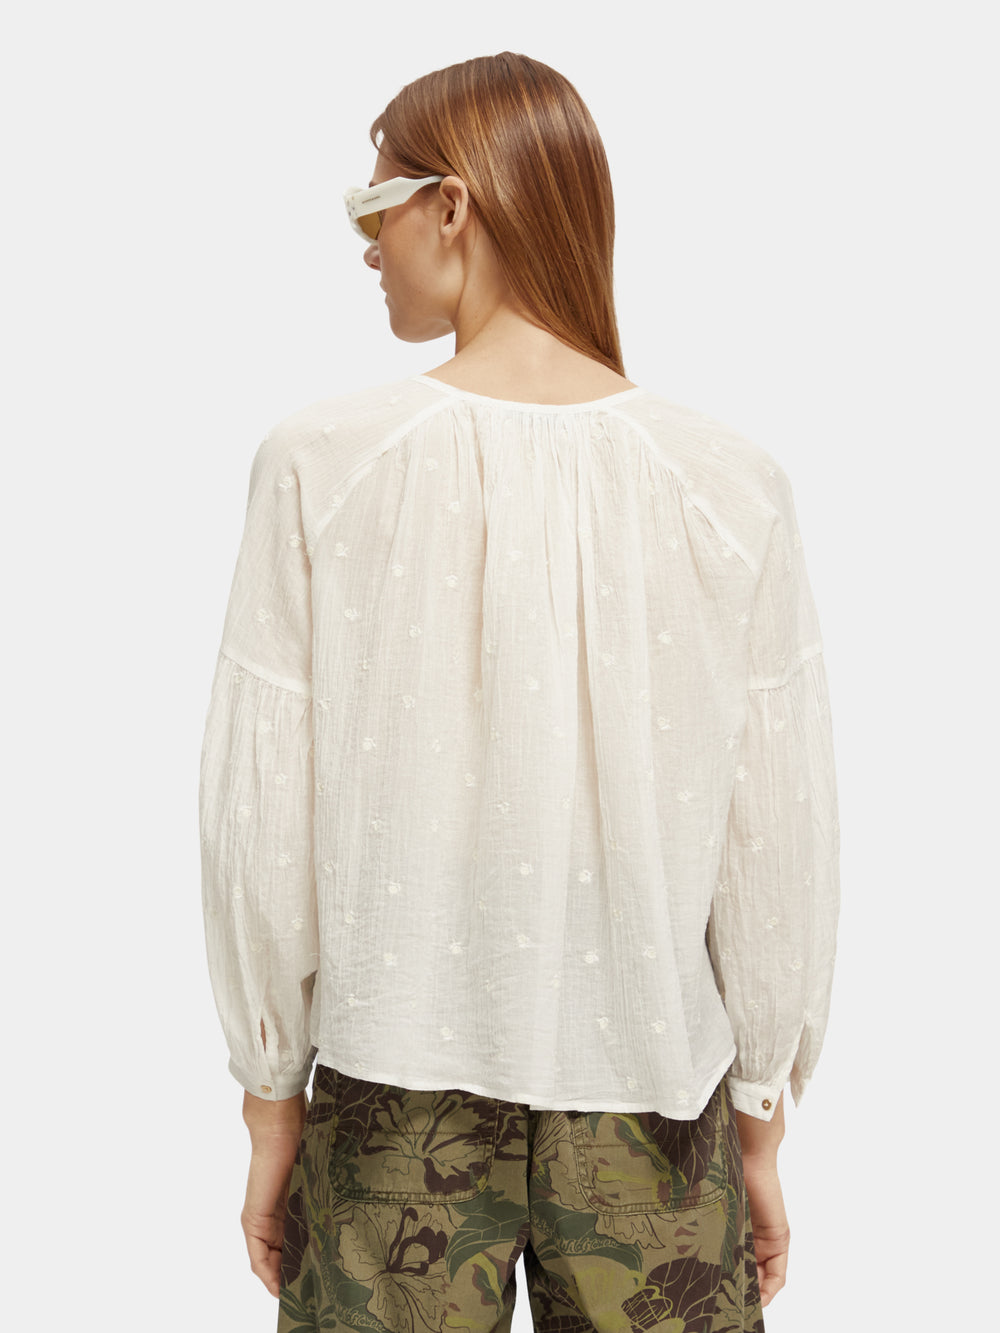 Voluminous popover top with allover embroidery - Scotch & Soda AU